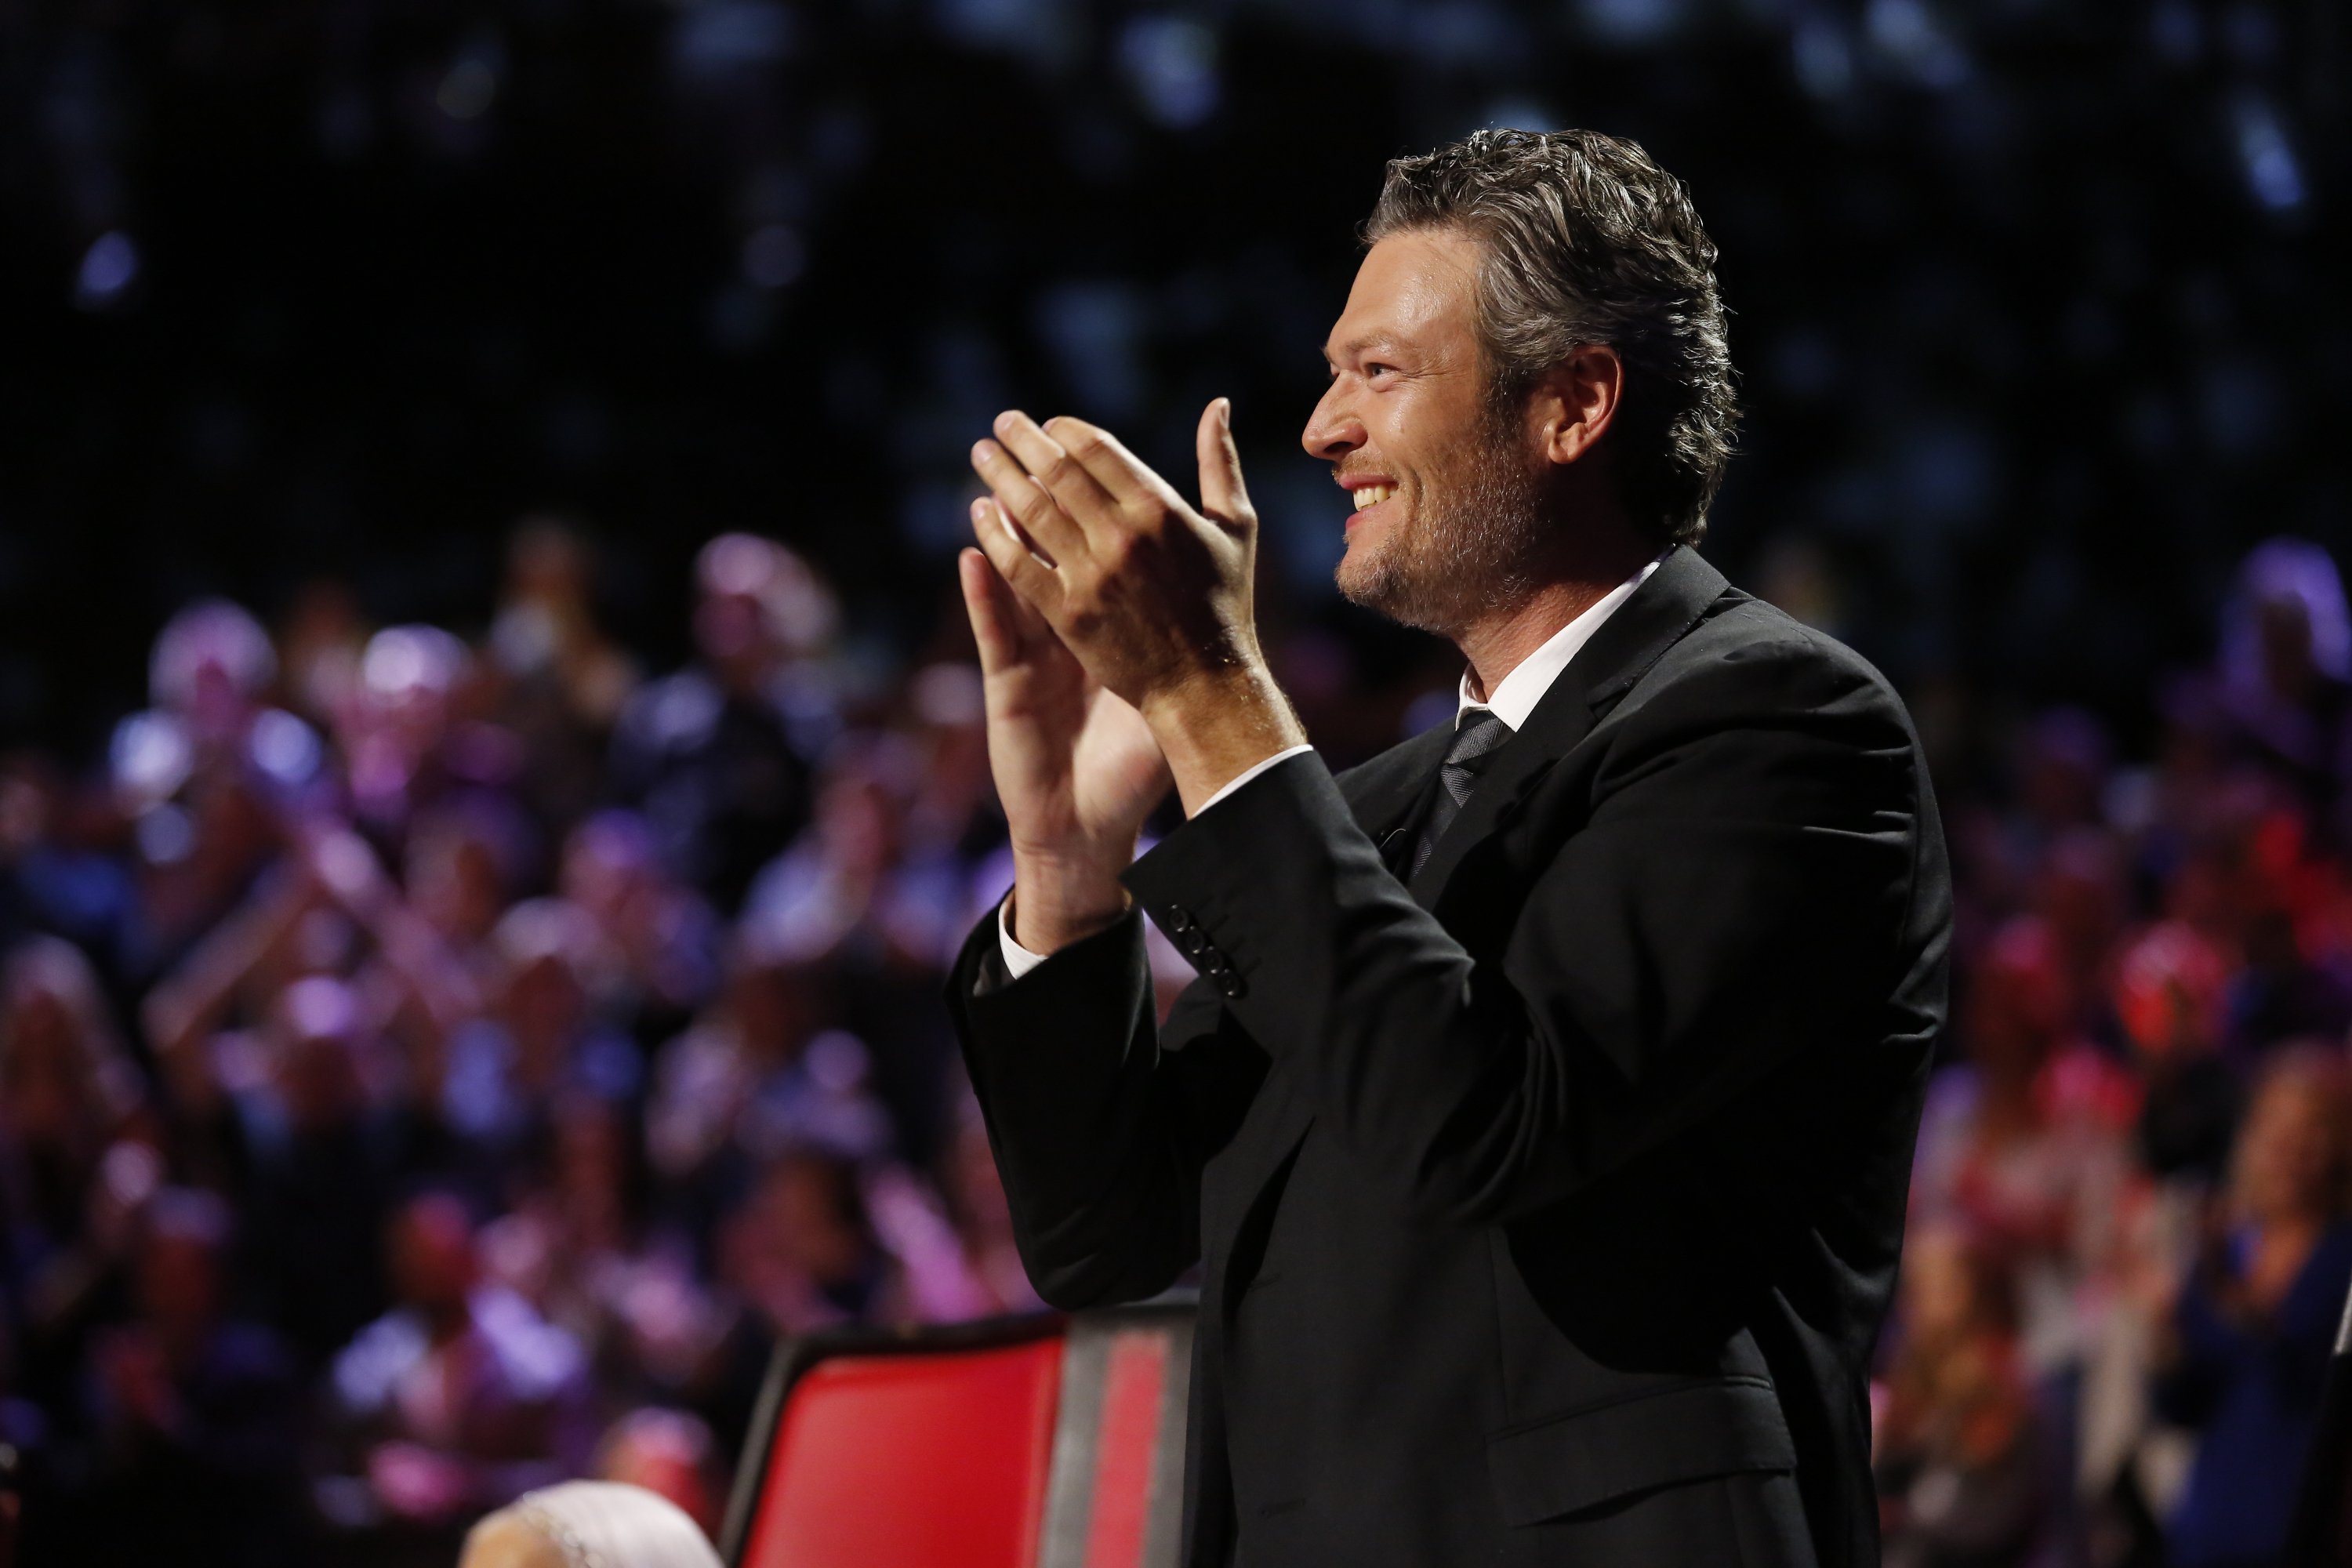 Blake Shelton on Season 10, Episode 1016A of "The Voice". May 9, 2016 | Source: Getty Images 